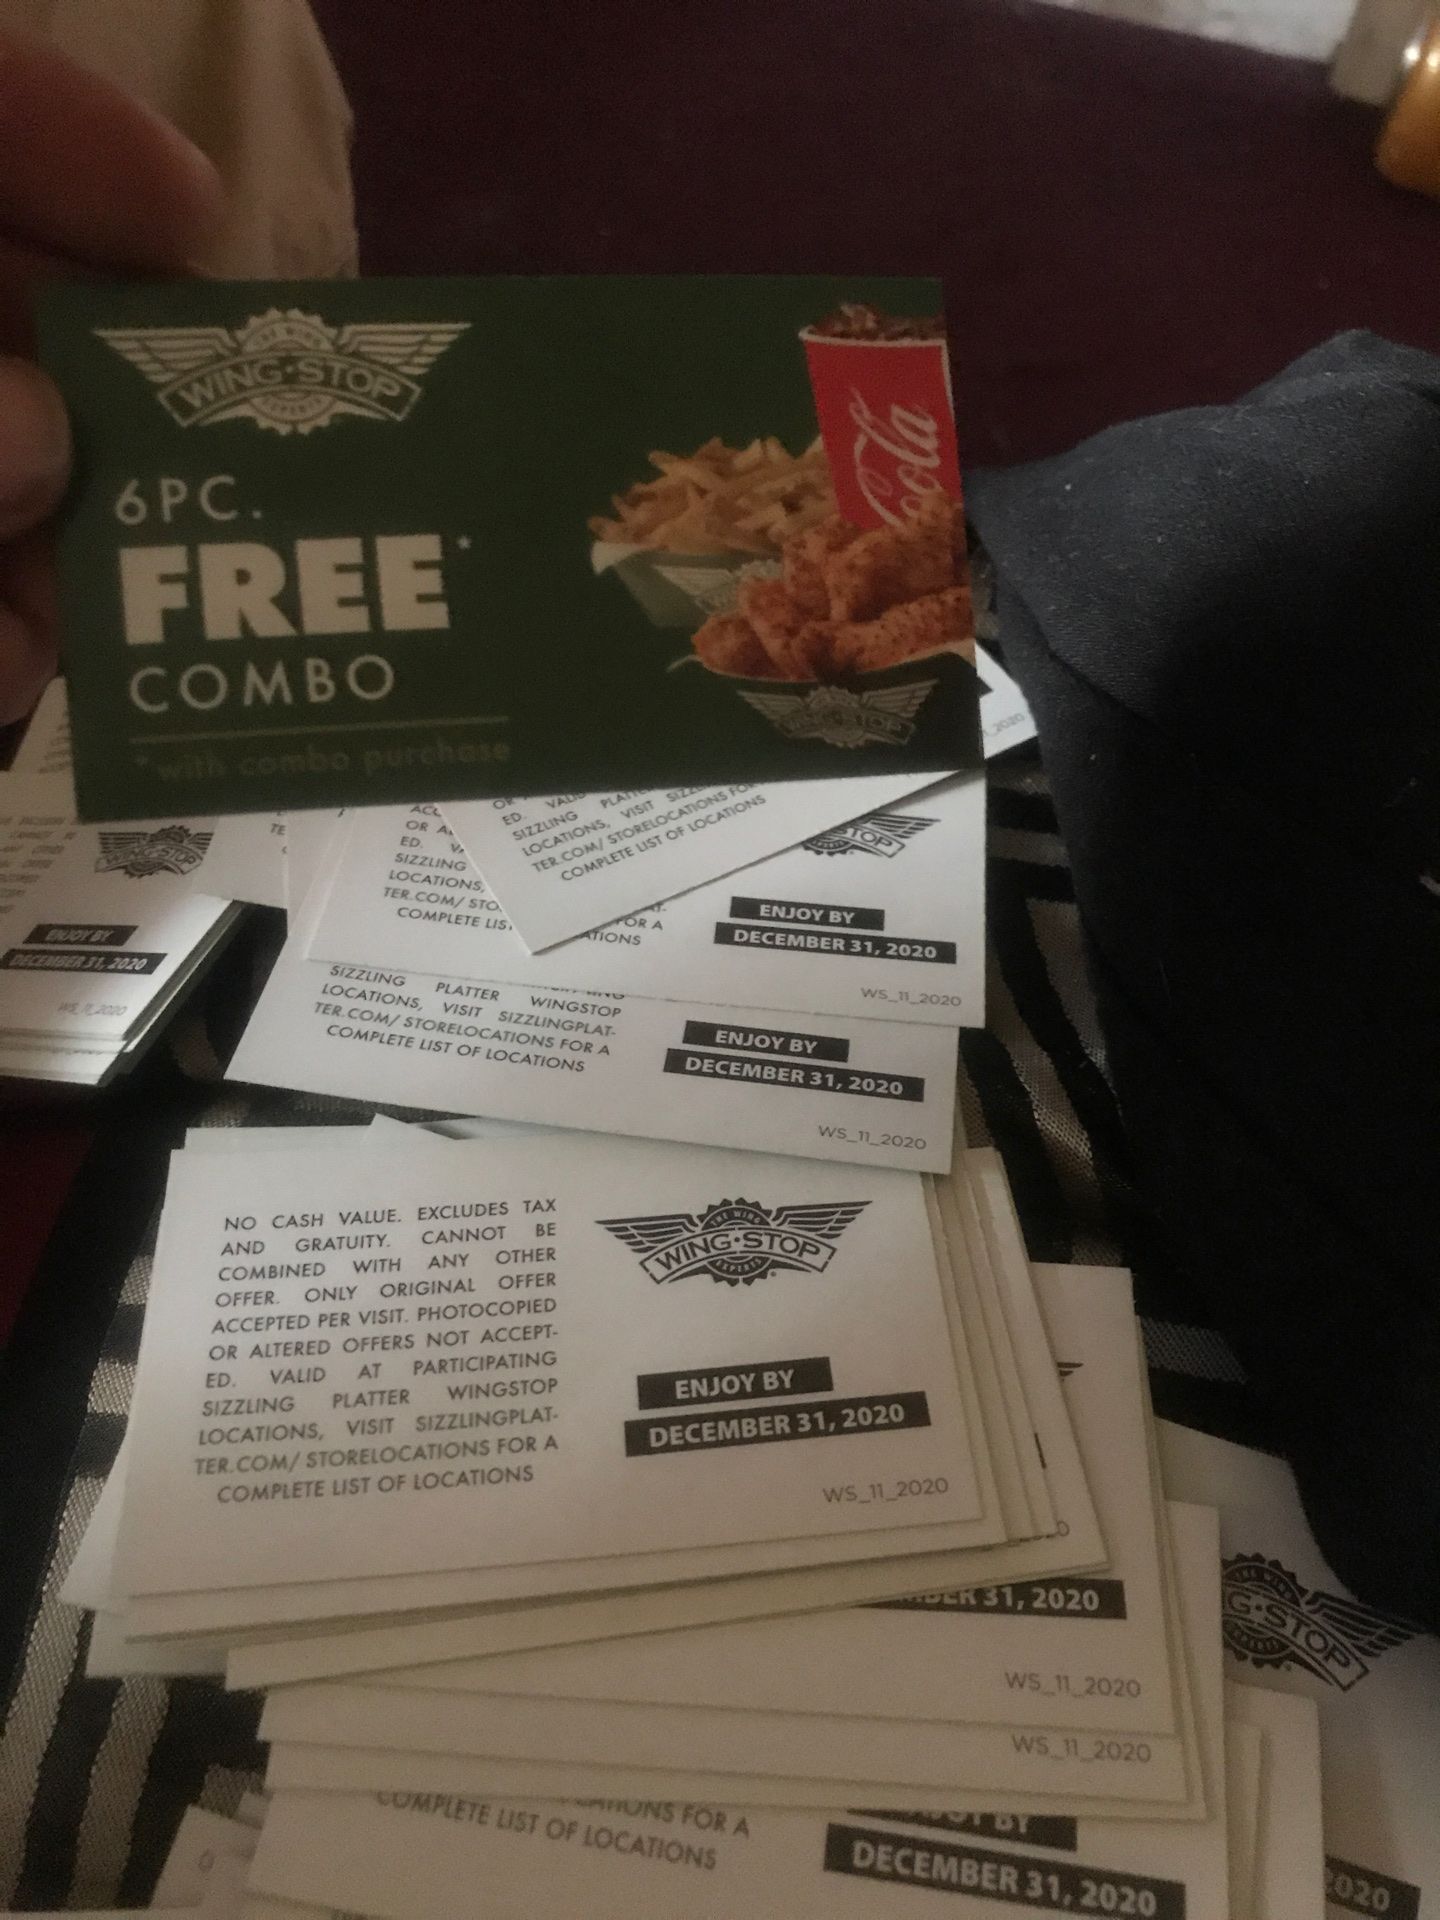 Wingstop free combo cards